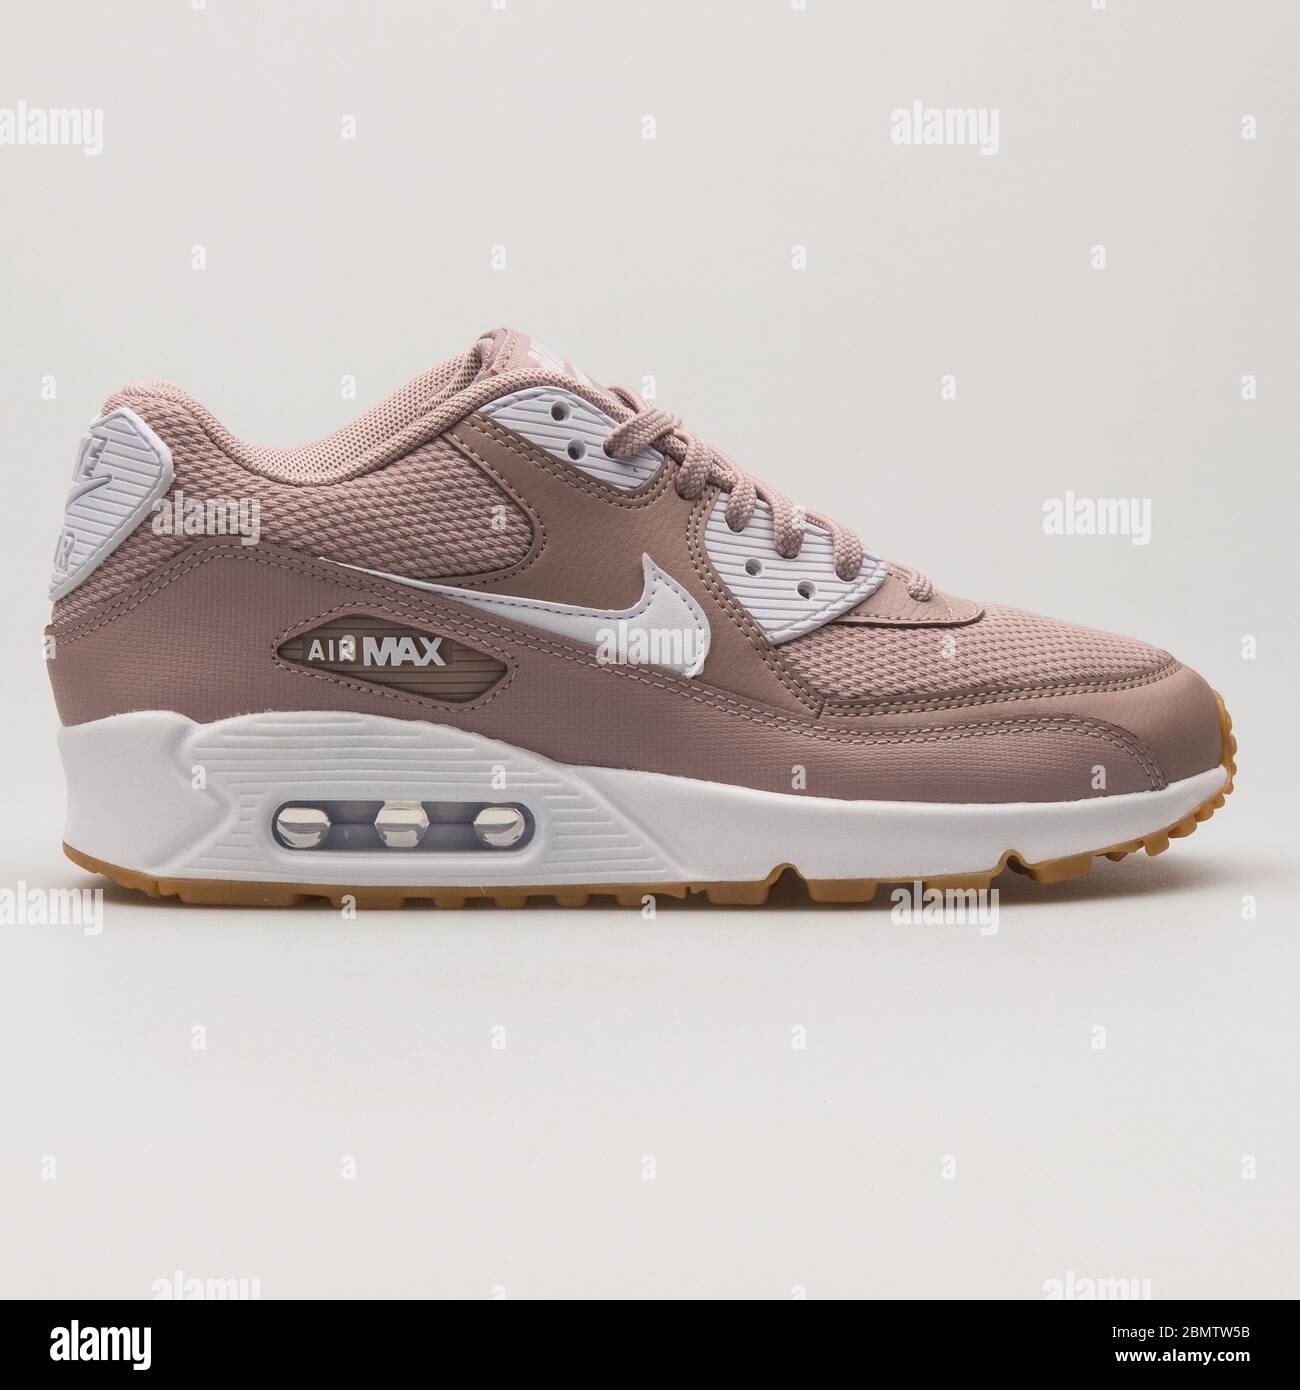 VIENNA, AUSTRIA - JUNE 14, 2018: Nike Air Max 90 taupe and white sneaker on white background. Stock Photo